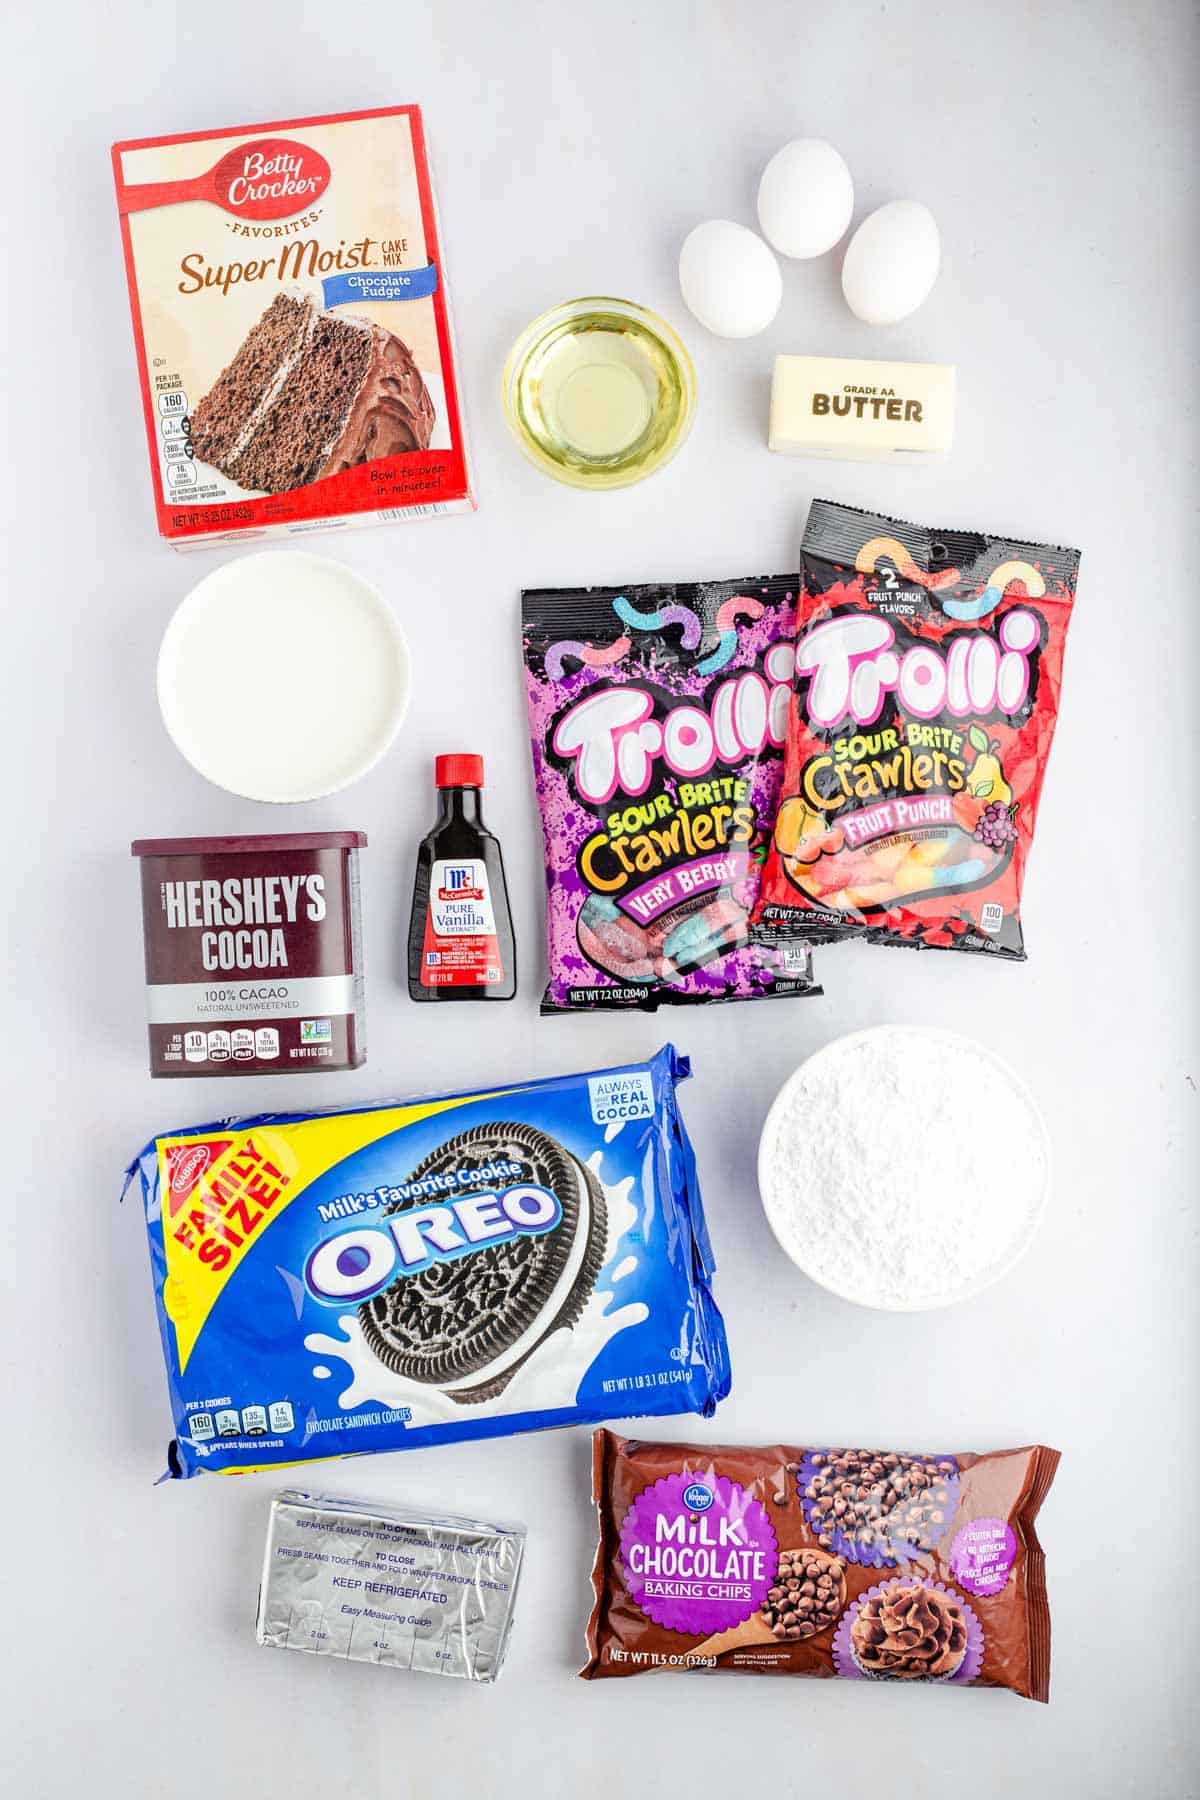 Image of ingredients needed to make gummy worm dirt cupcakes.